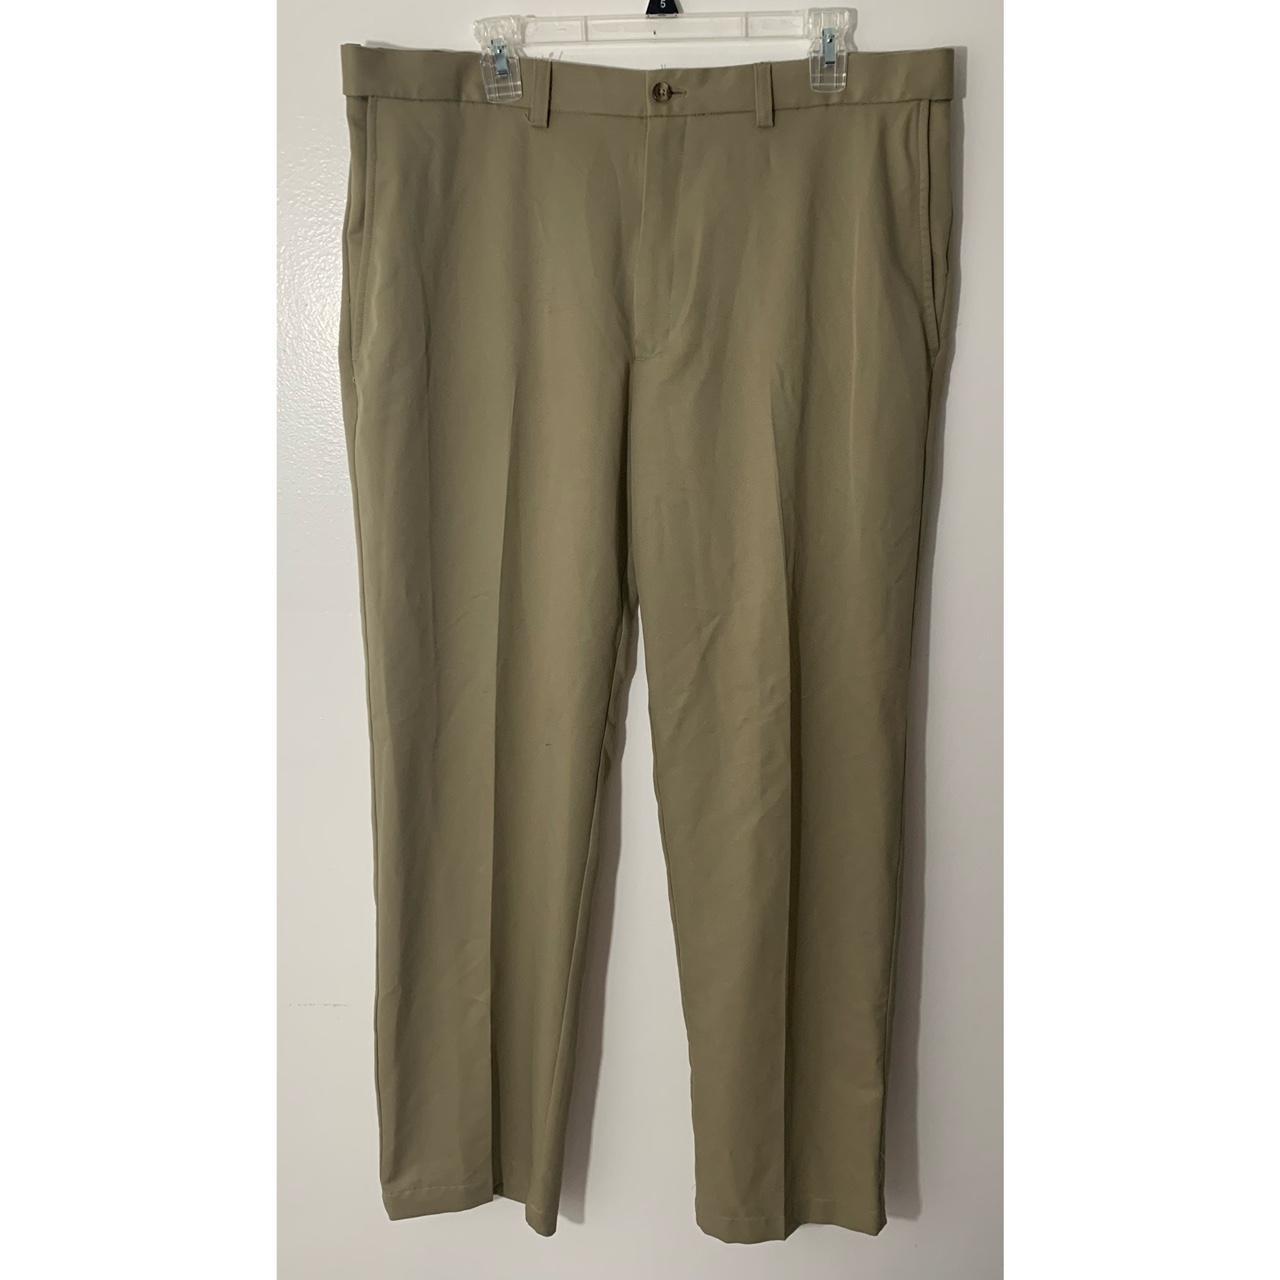 Product Image 1 - Pants size 38x31. Great condition.